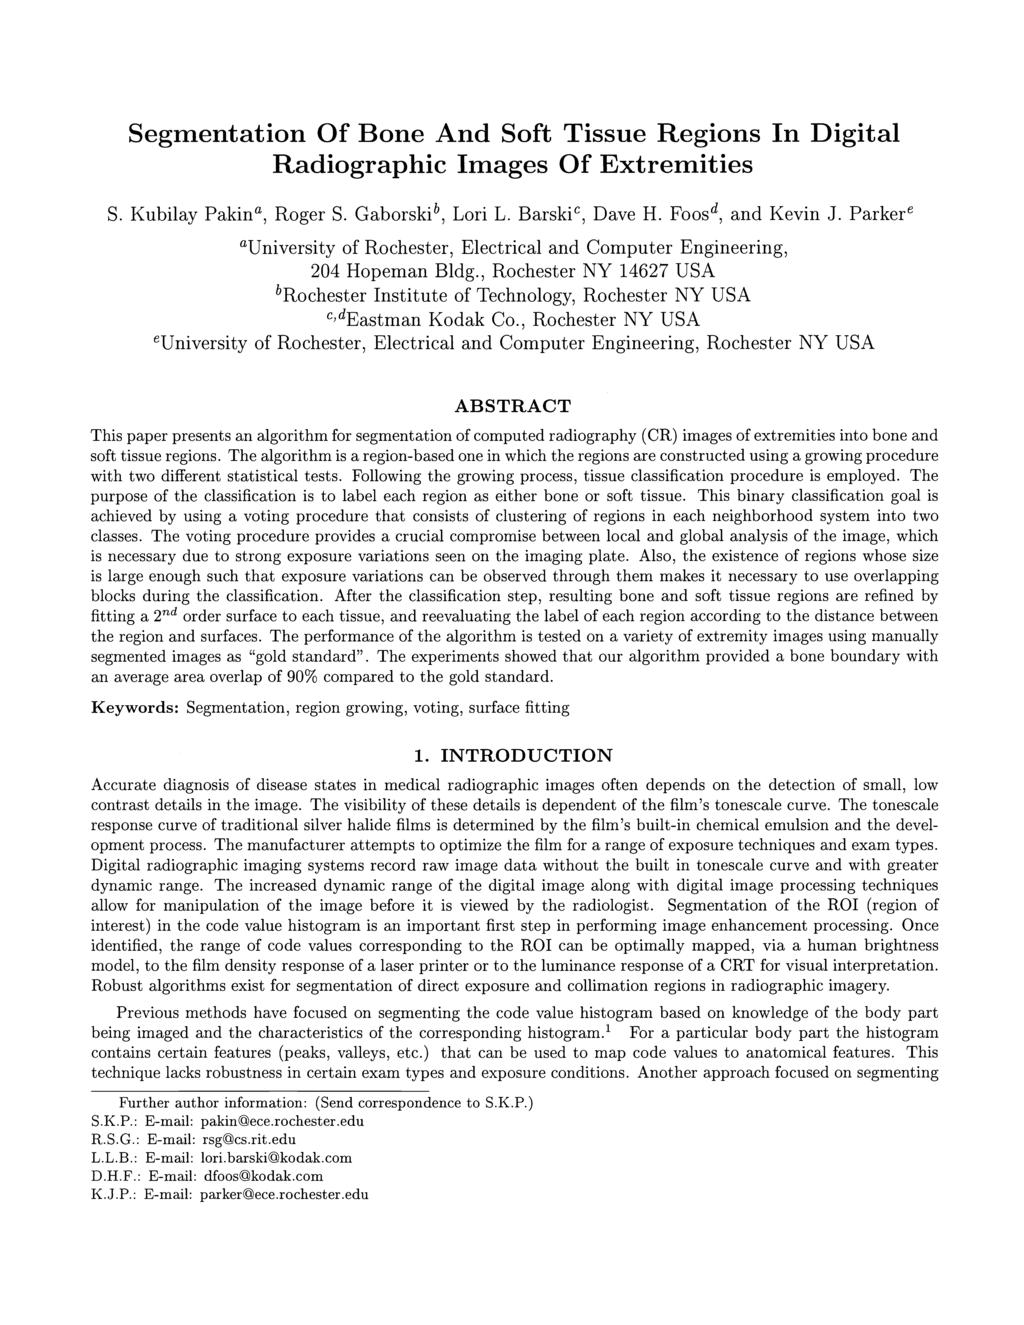 Segmentation Of Bone And Soft Tissue Regions In Digital Radiographic Images Of Extremities S. Kubilay Pakina, Roger S. Gaborskib, Lori L. Barskic, Dave H. Foosd, and Kevin J.